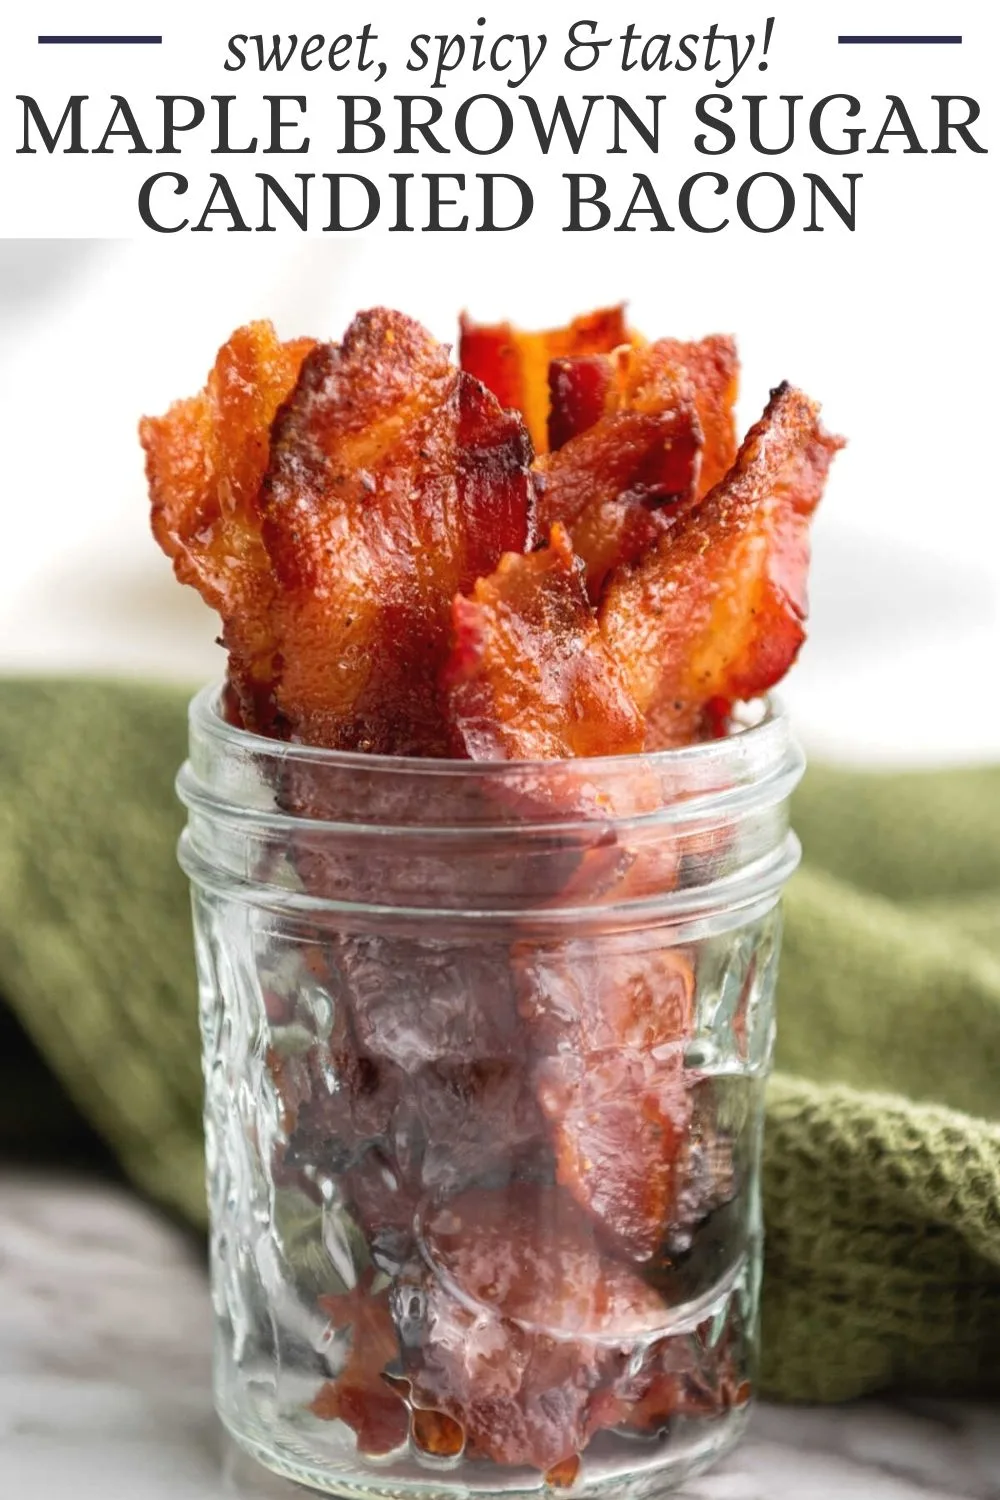 Maple candied bacon is the perfect mix of sweet and savory. Bacon is coated with a maple syrup, brown sugar and black pepper mixture and baked until crispy to make a sweet and spicy treat.